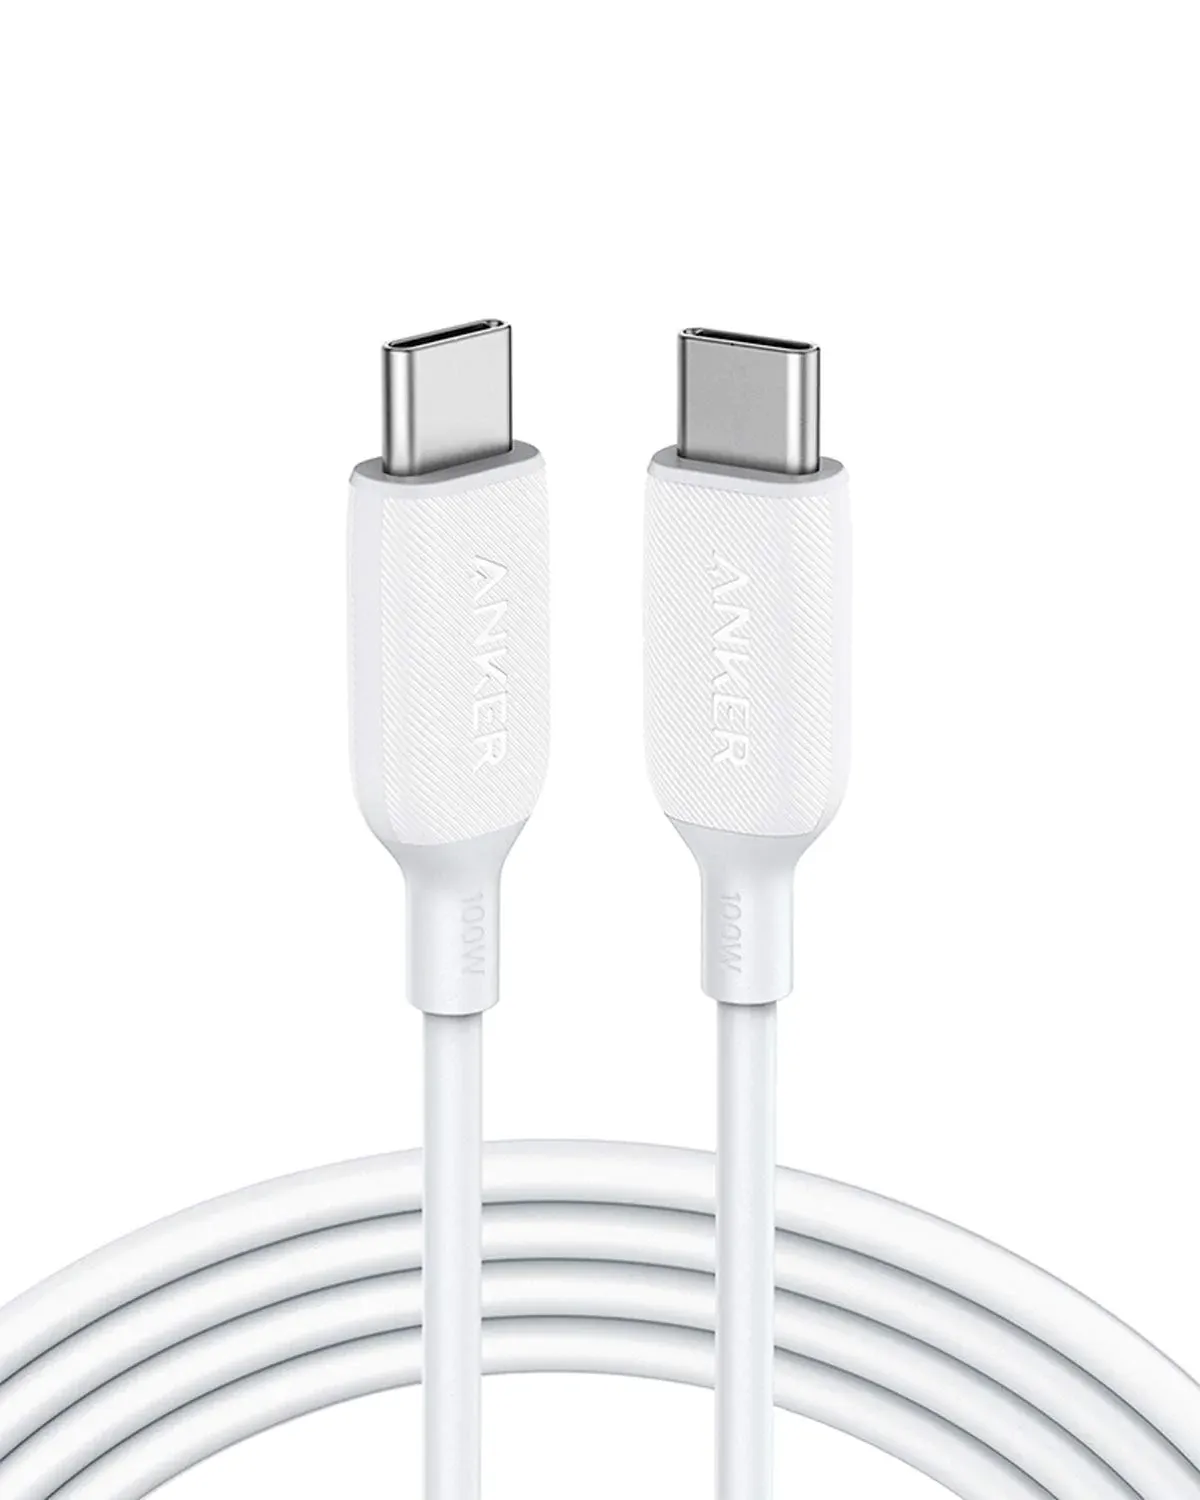 Anker 543 USB-C to USB-C cable